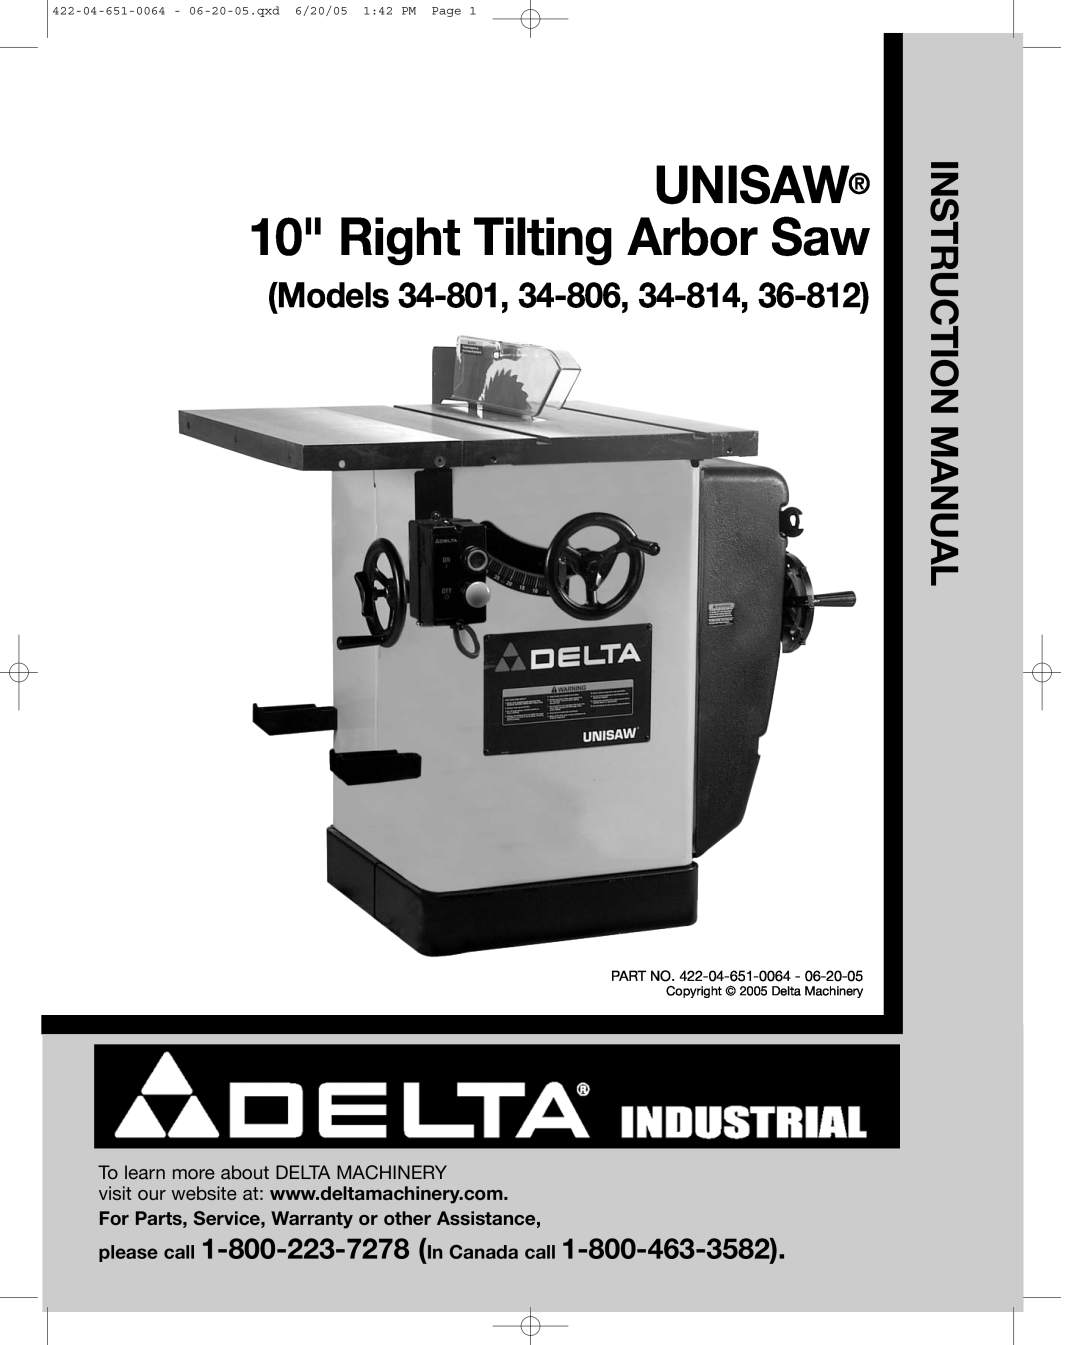 Delta 34-814 instruction manual For Parts, Service, Warranty or other Assistance, UNISAW 10 Right Tilting Arbor Saw 